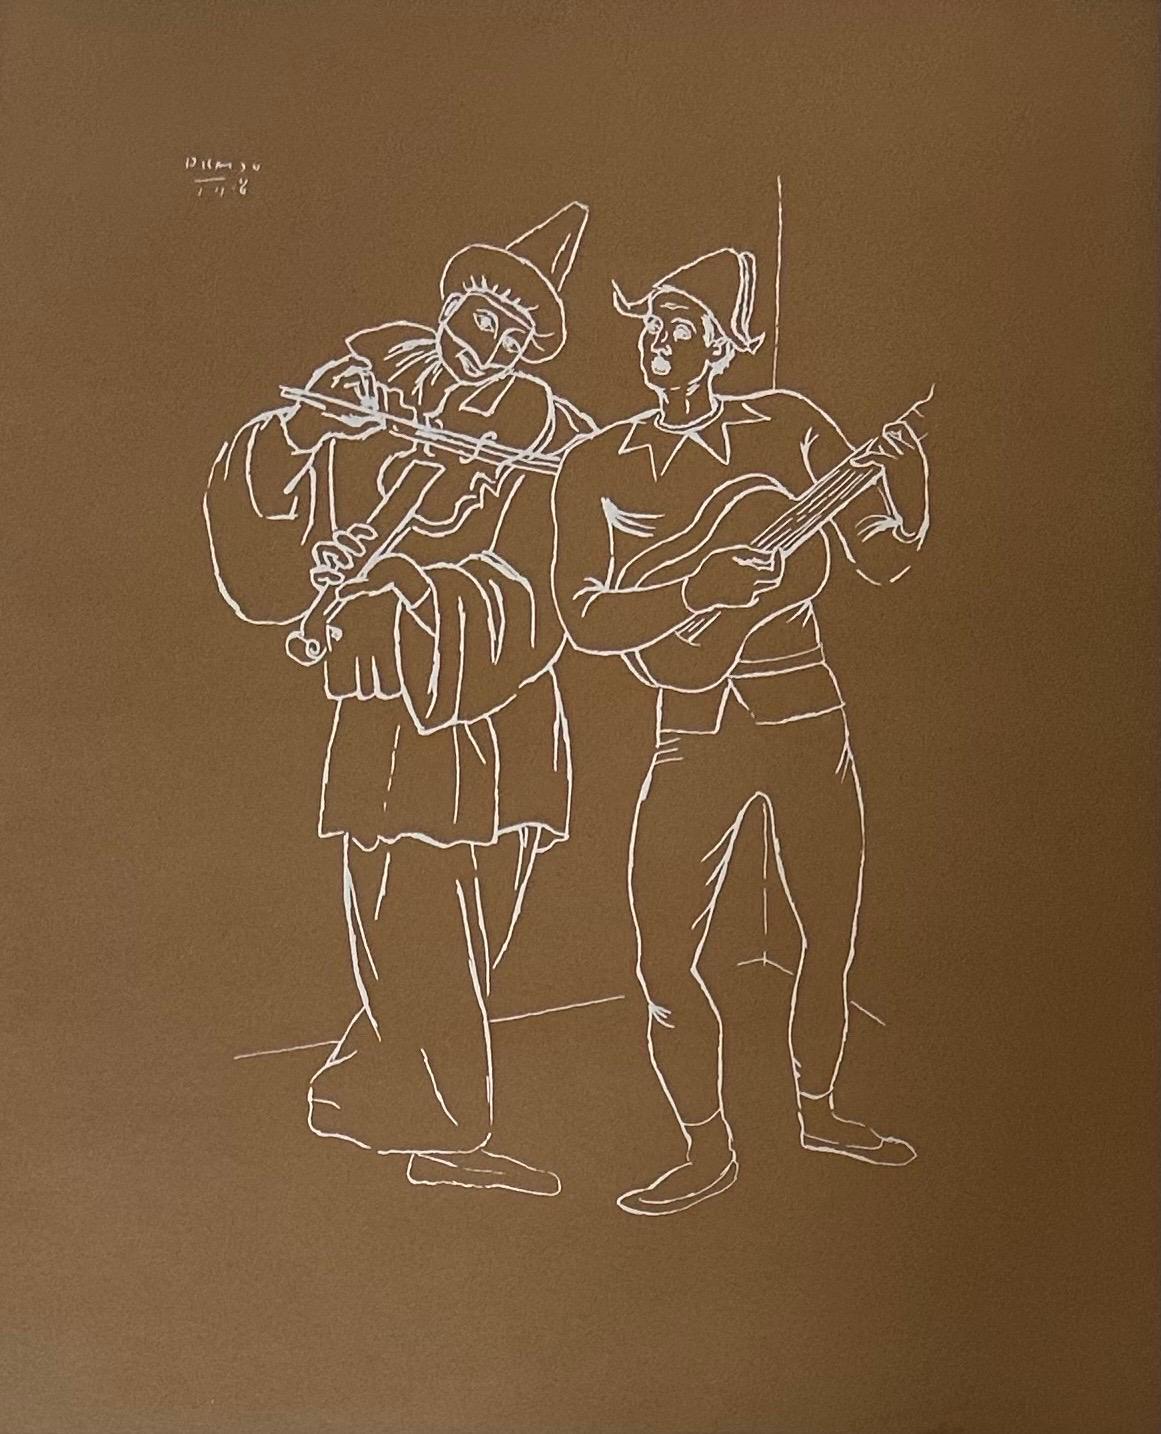 Mid-Century "Pierrot & Harlequin 1918" Lithograph by Pablo Picasso